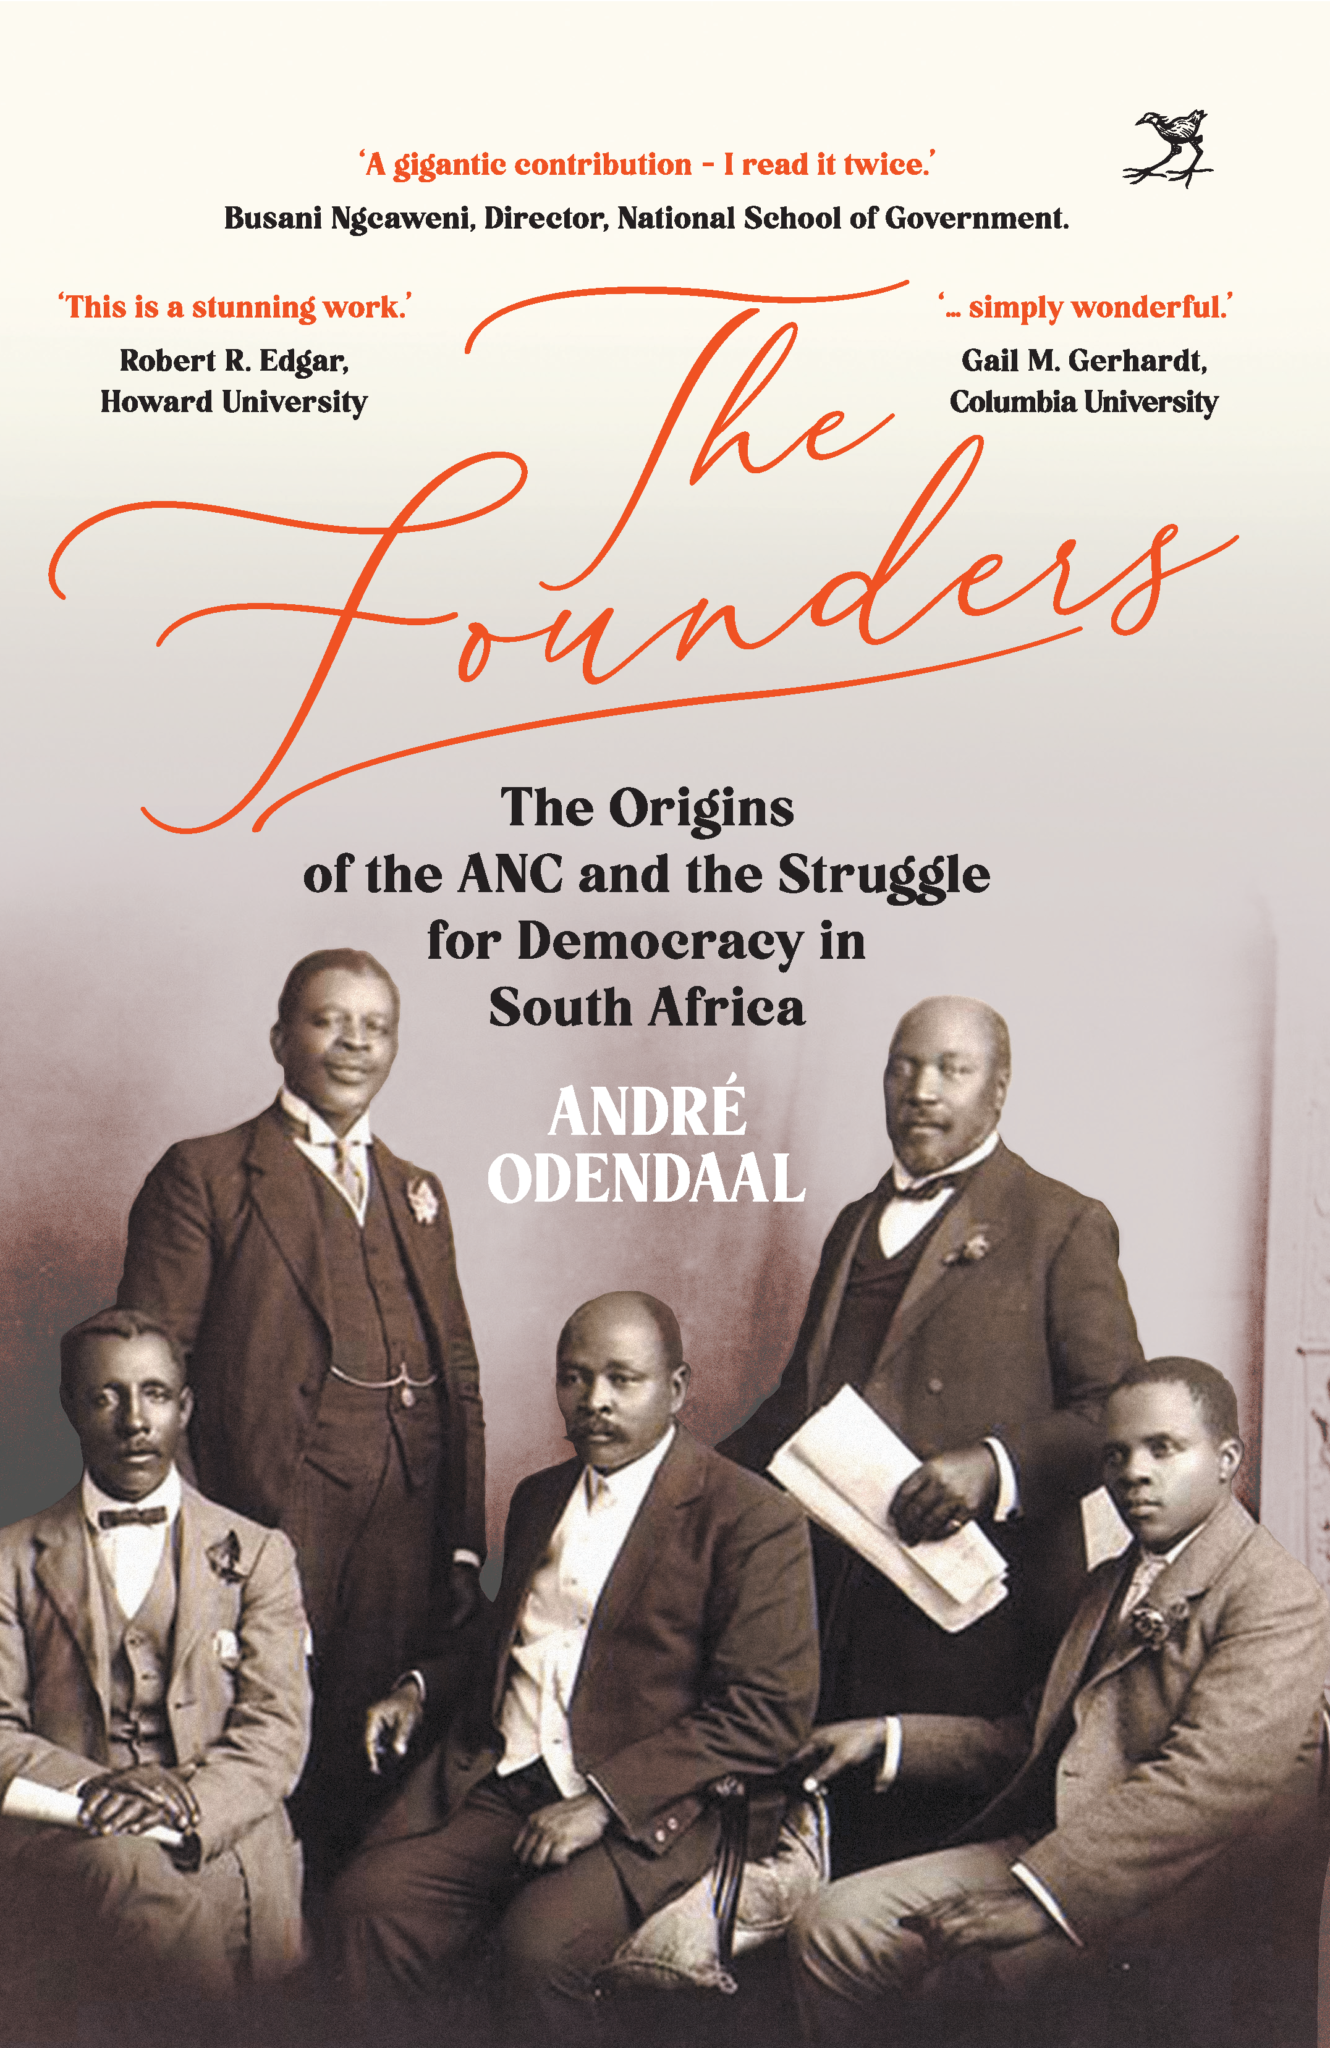 The Founders: The Origins of the African National Congress and the Struggle for Democracy